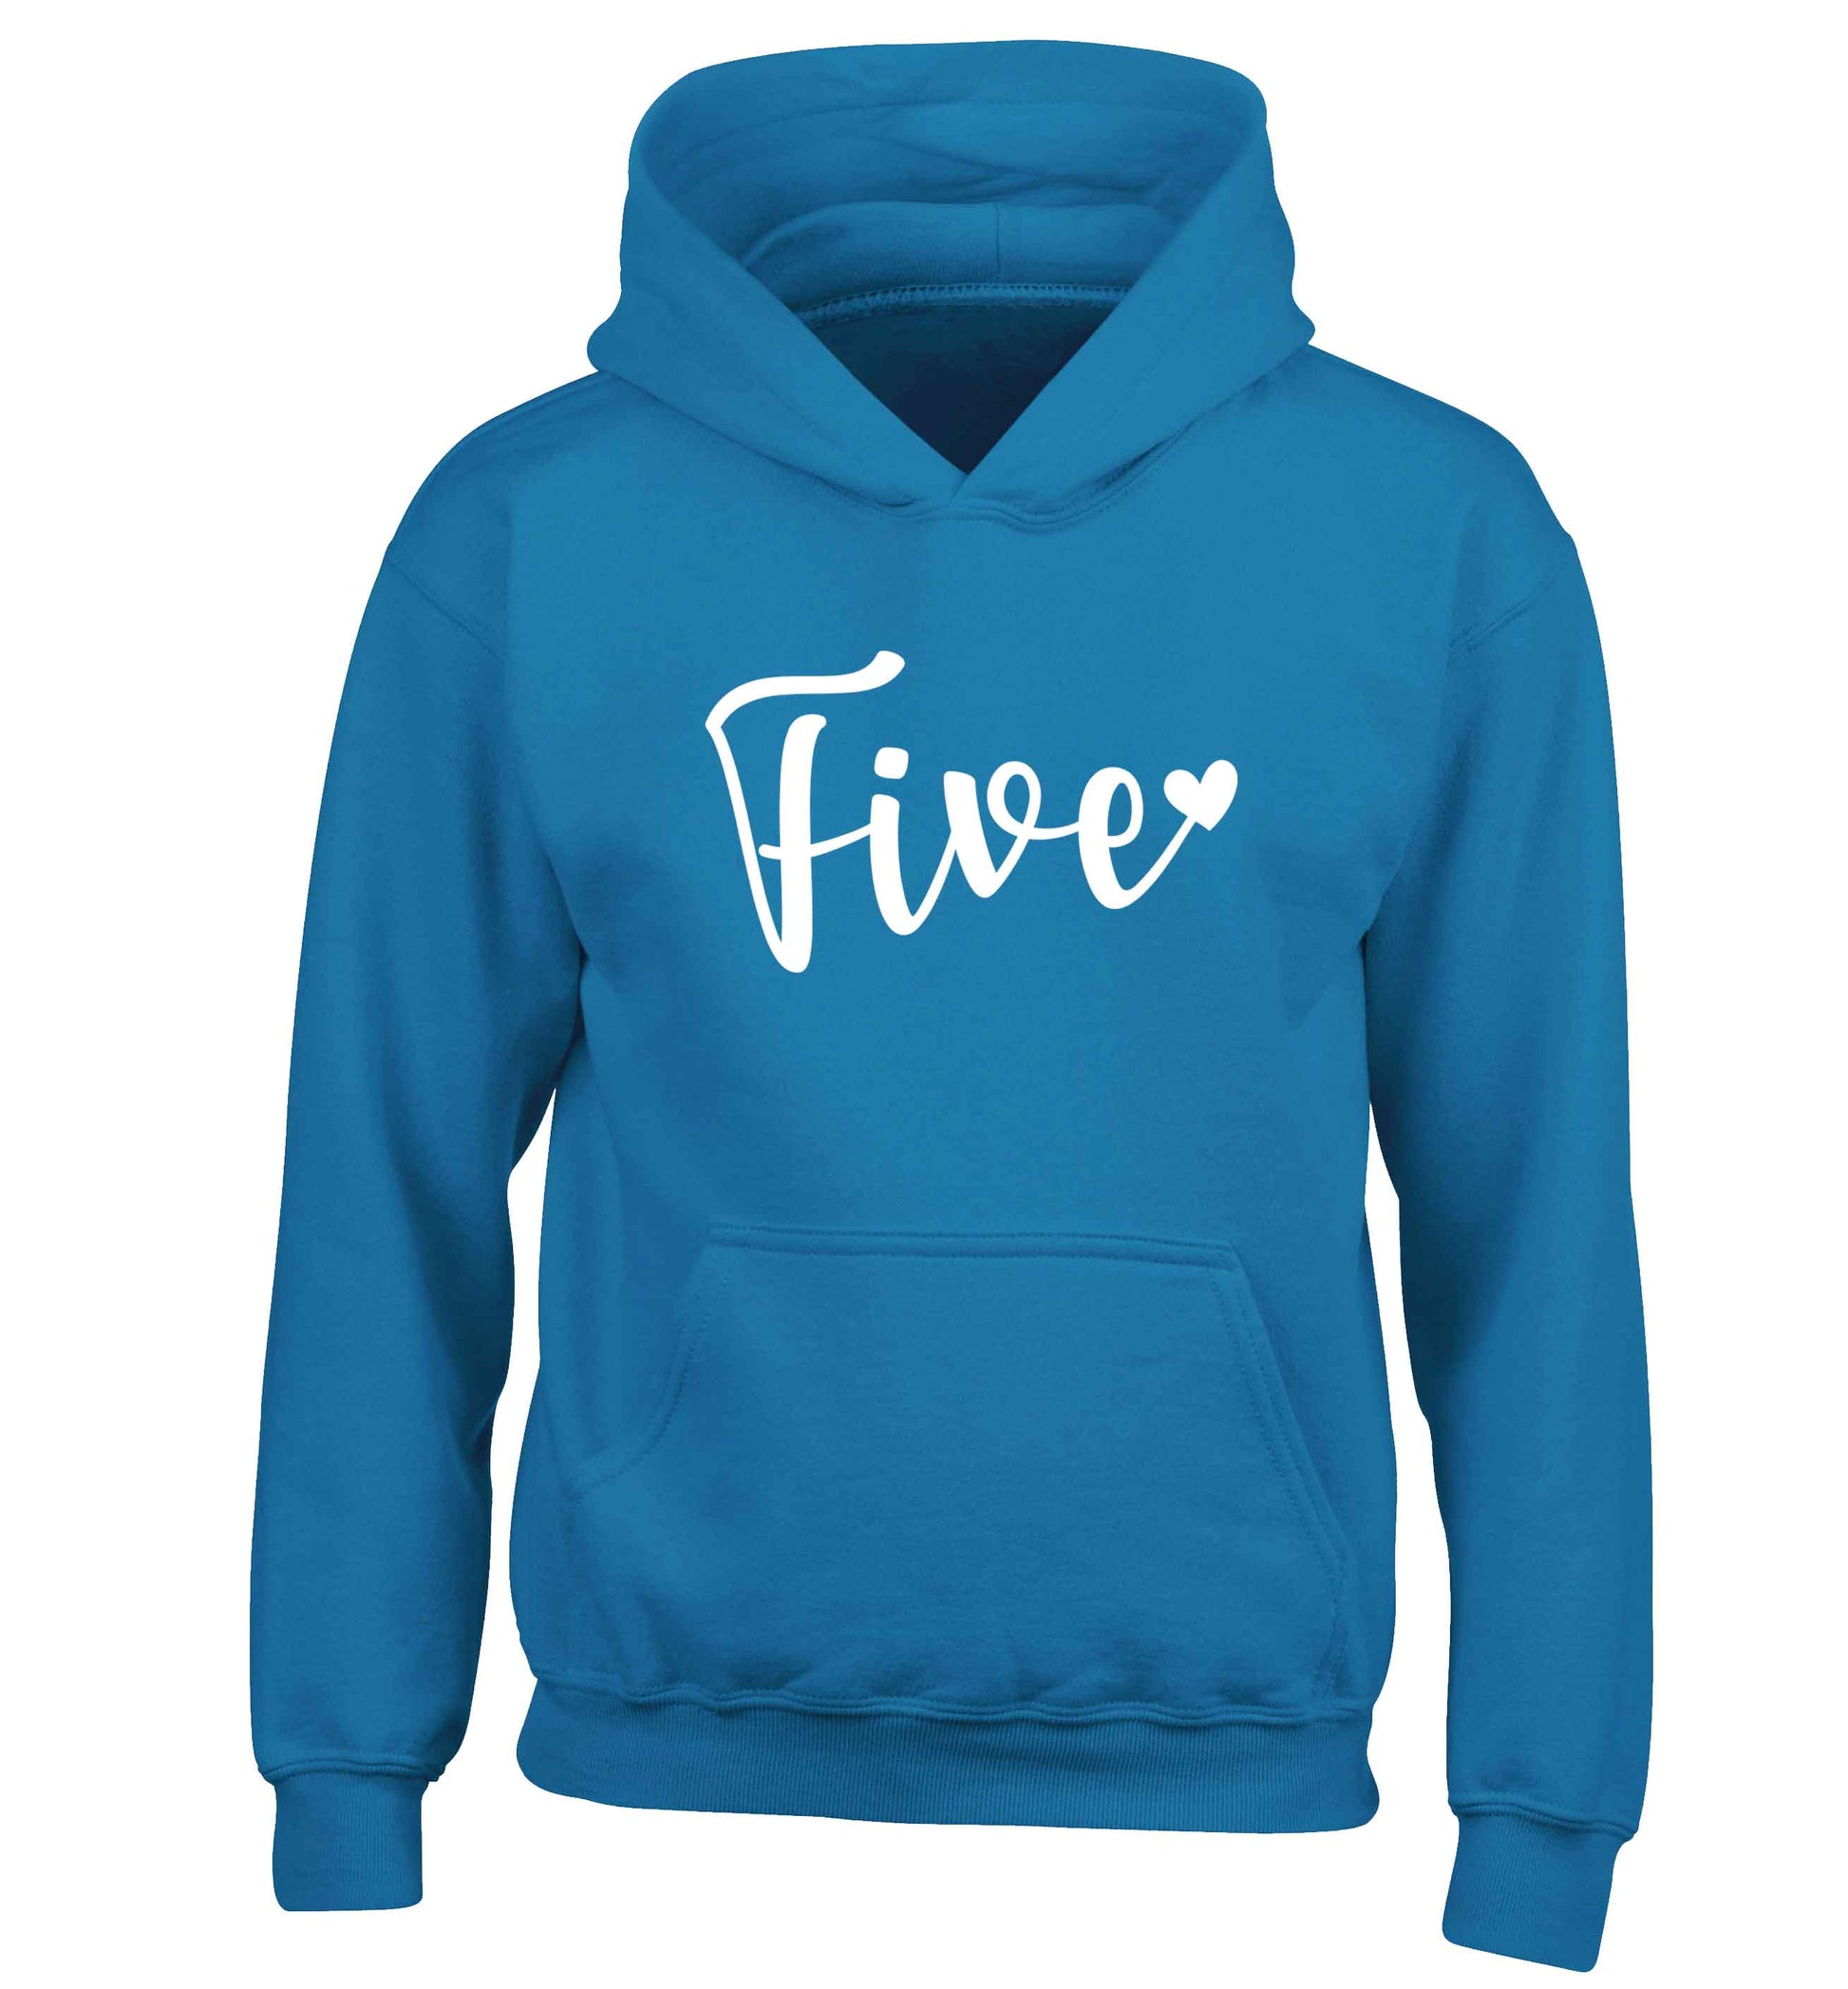 Five and heart children's blue hoodie 12-13 Years